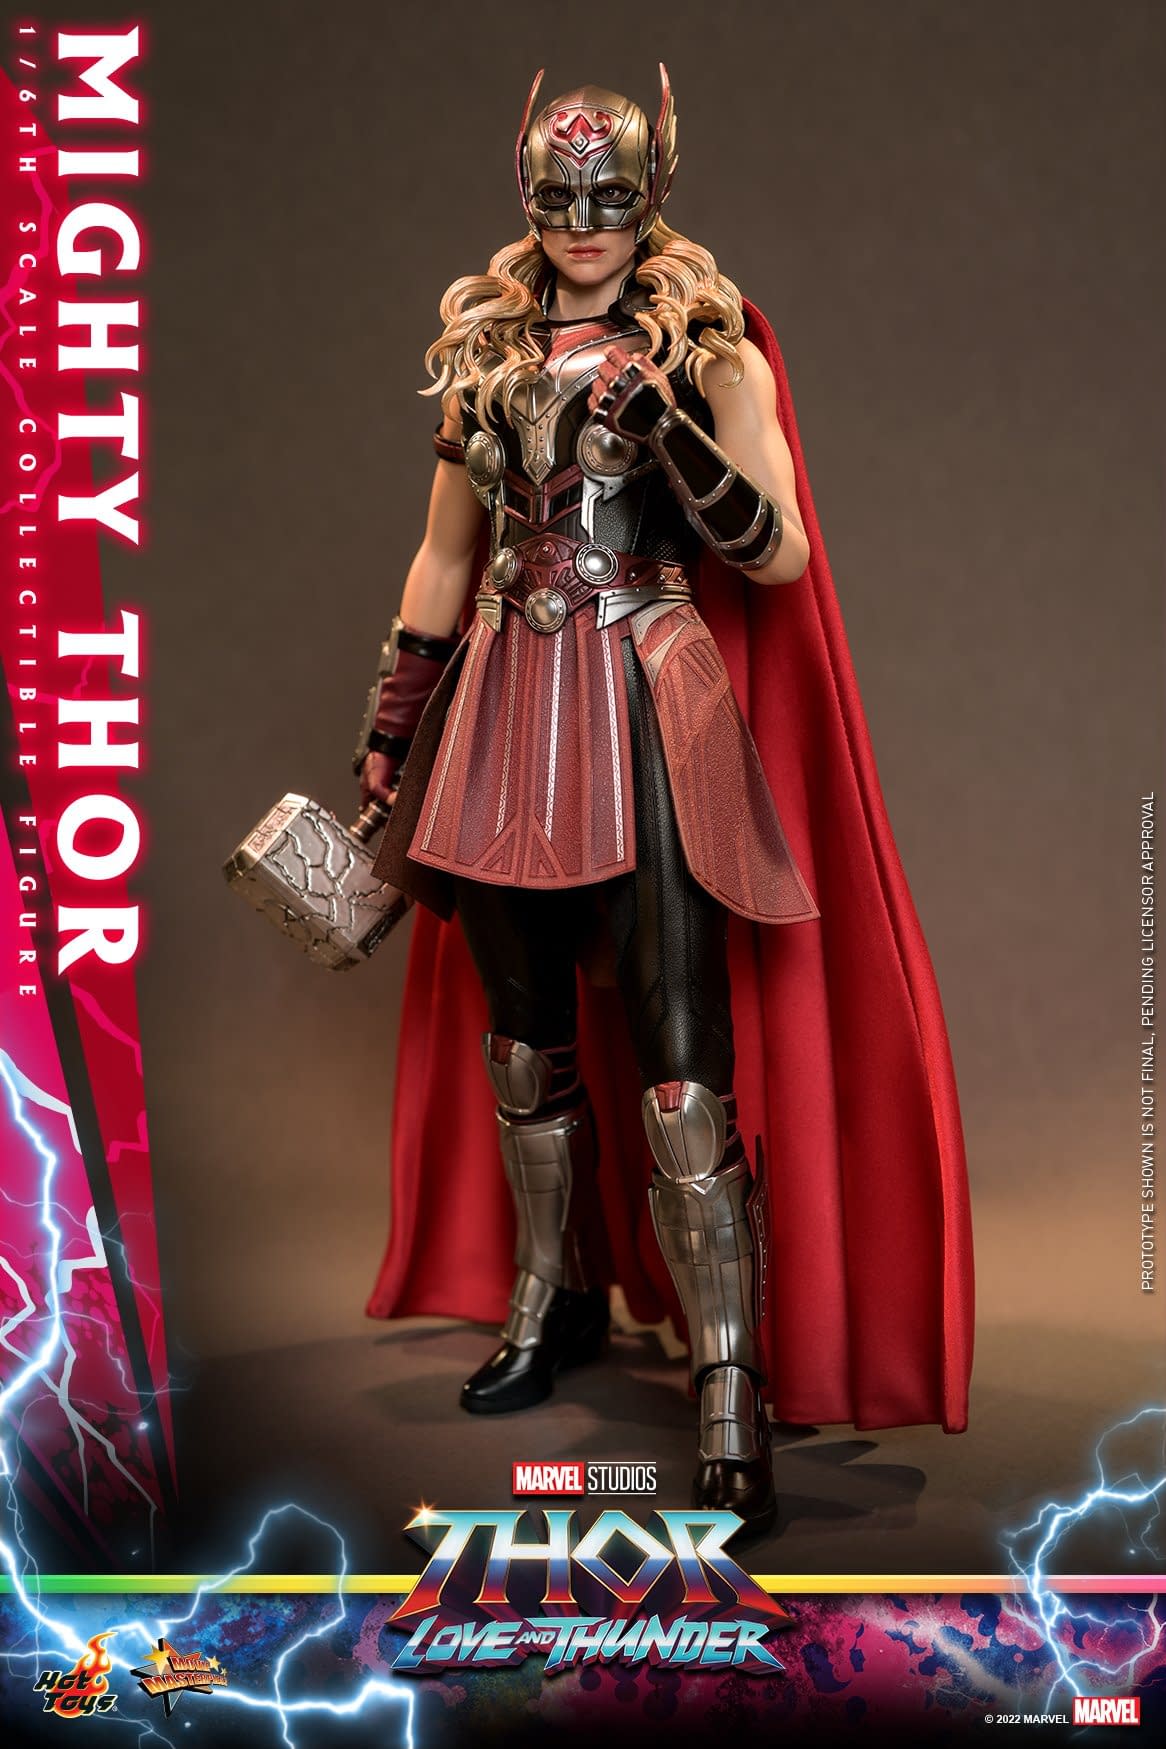 Hot Toys Puts the Hammer Down with Jane Foster Thor Figure 